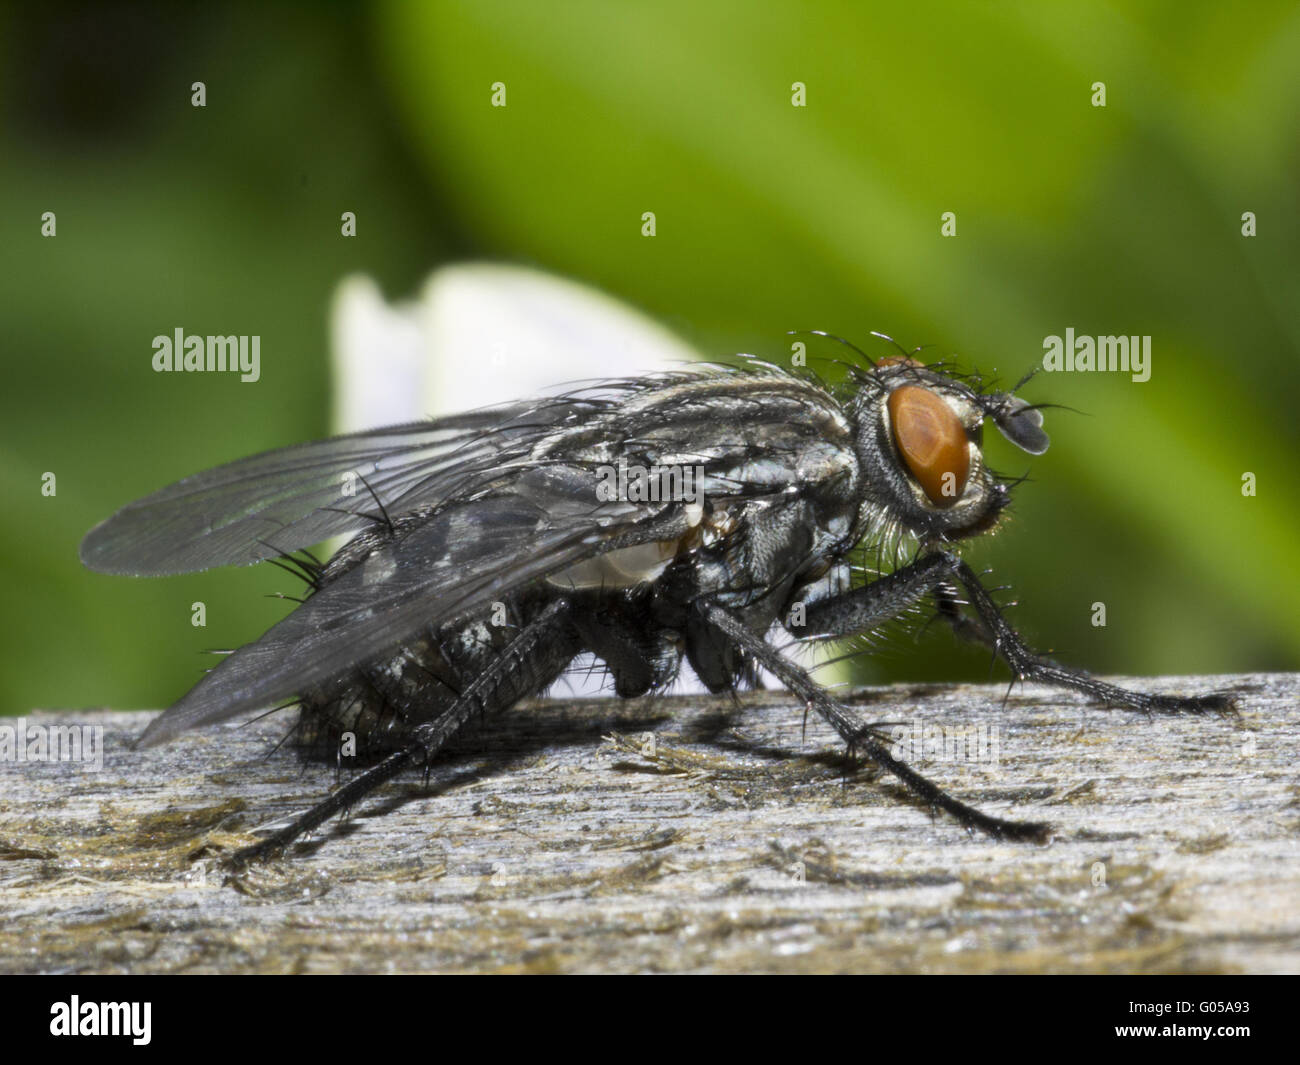 Big house fly musca domestica Stock Photo